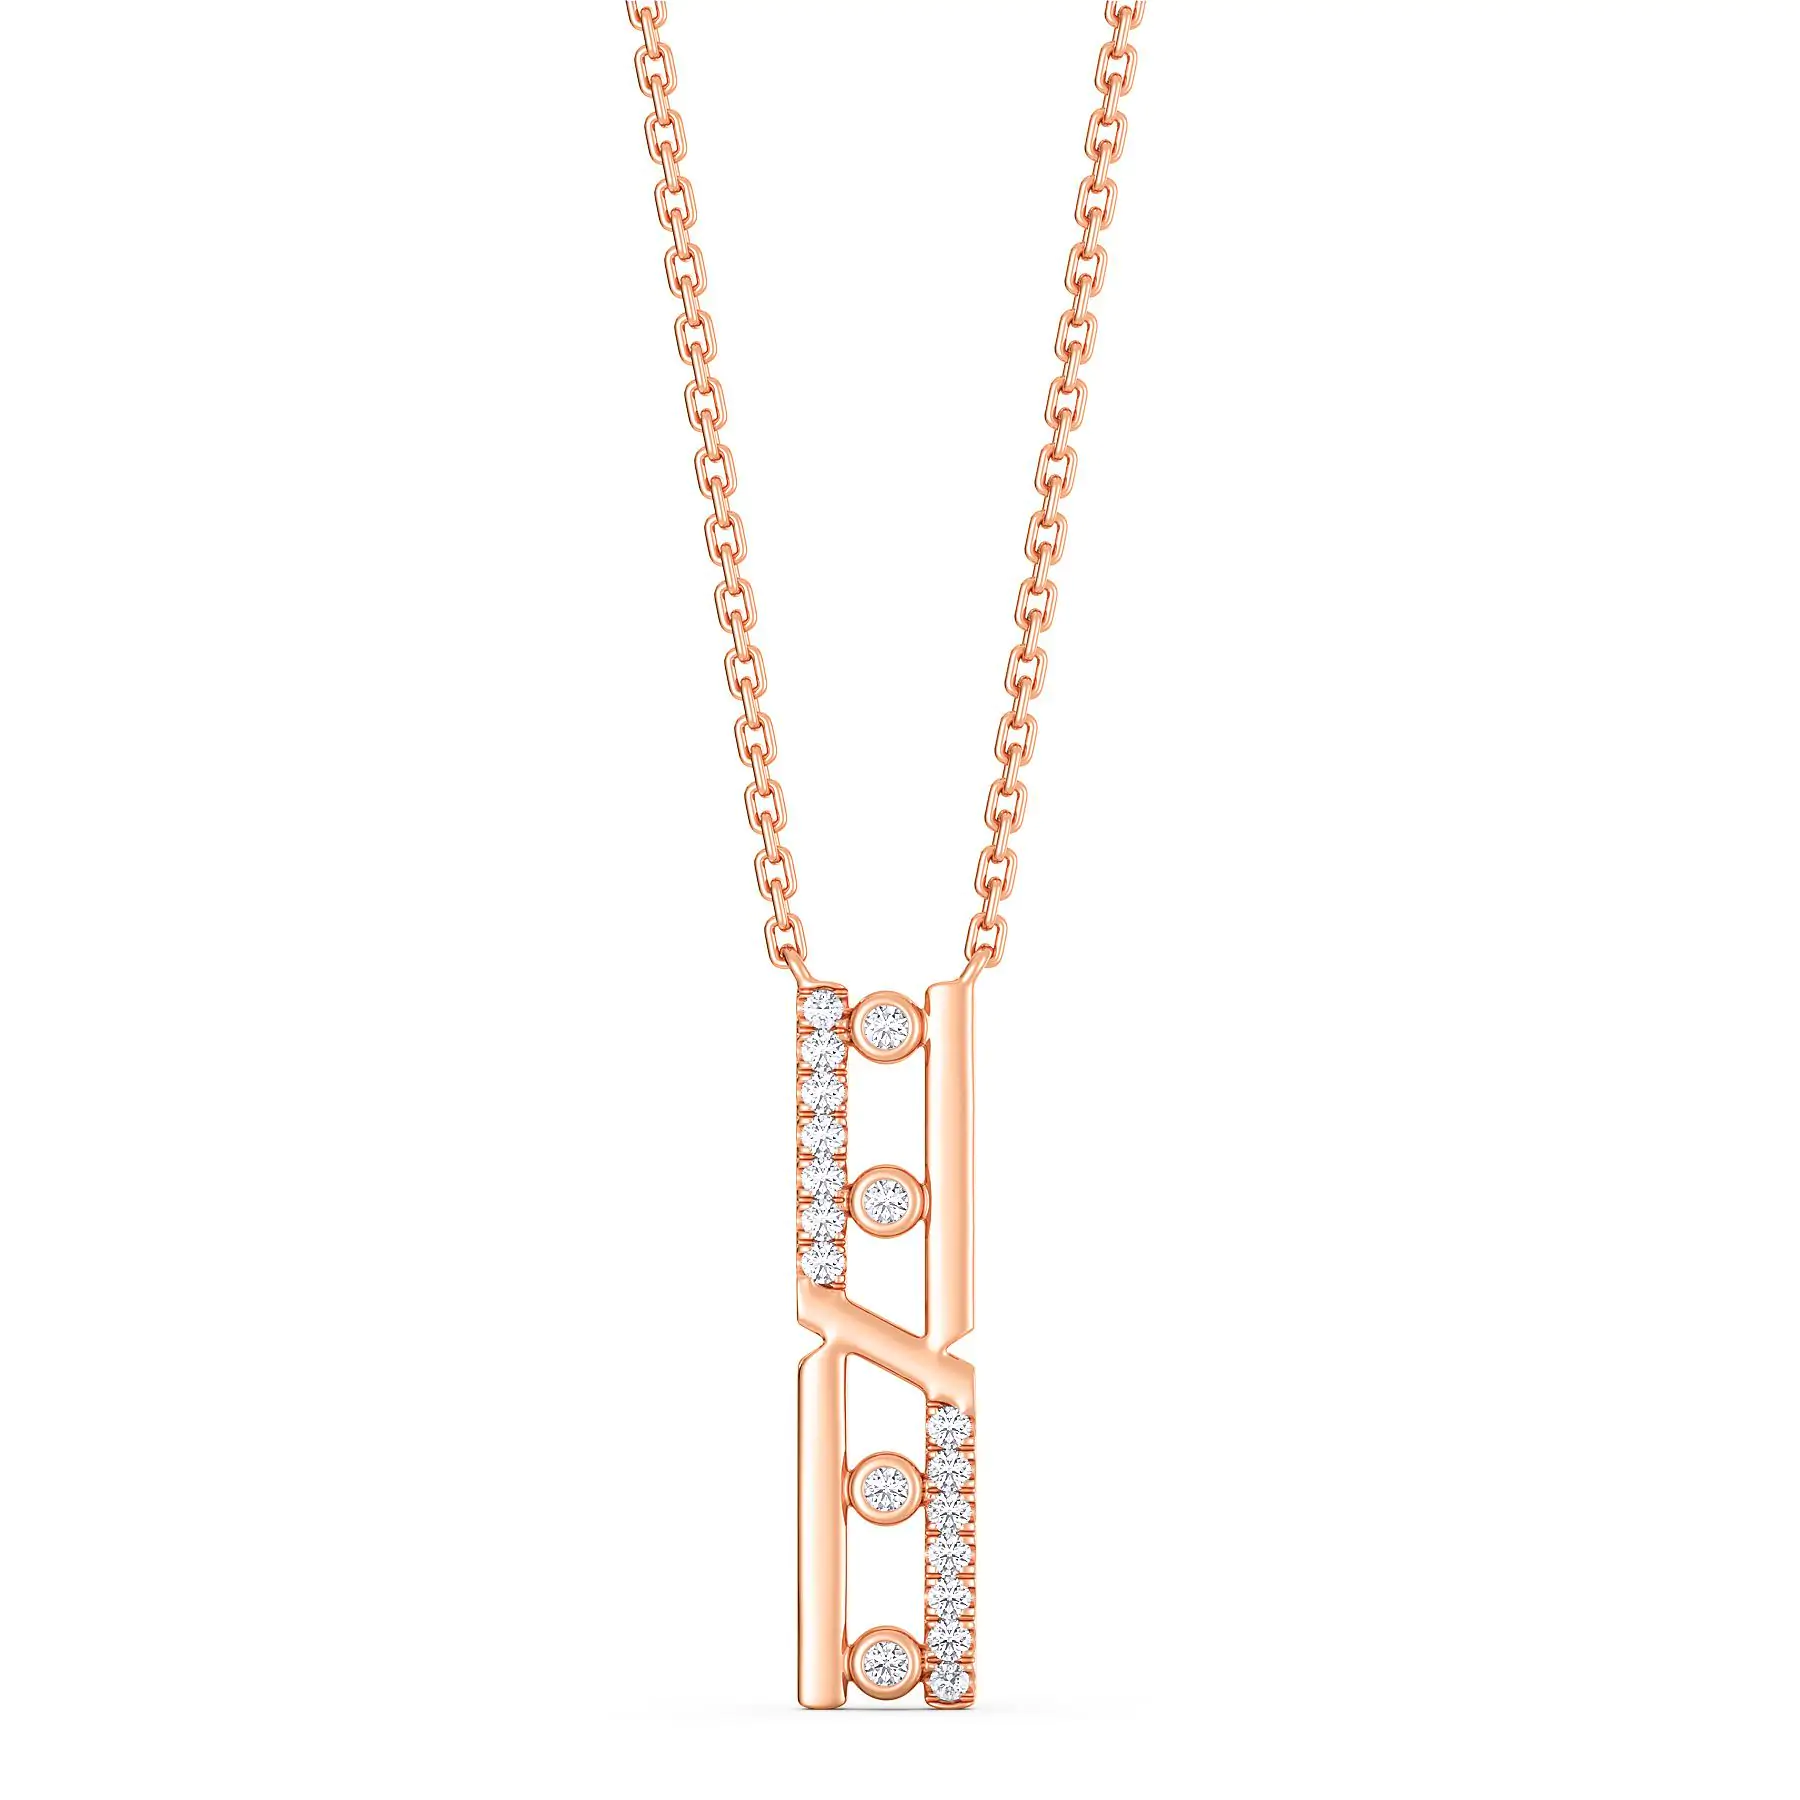 Luciana Uncurled Diamond Necklace Lab-grown diamond NK of SVR in  Gold Metal